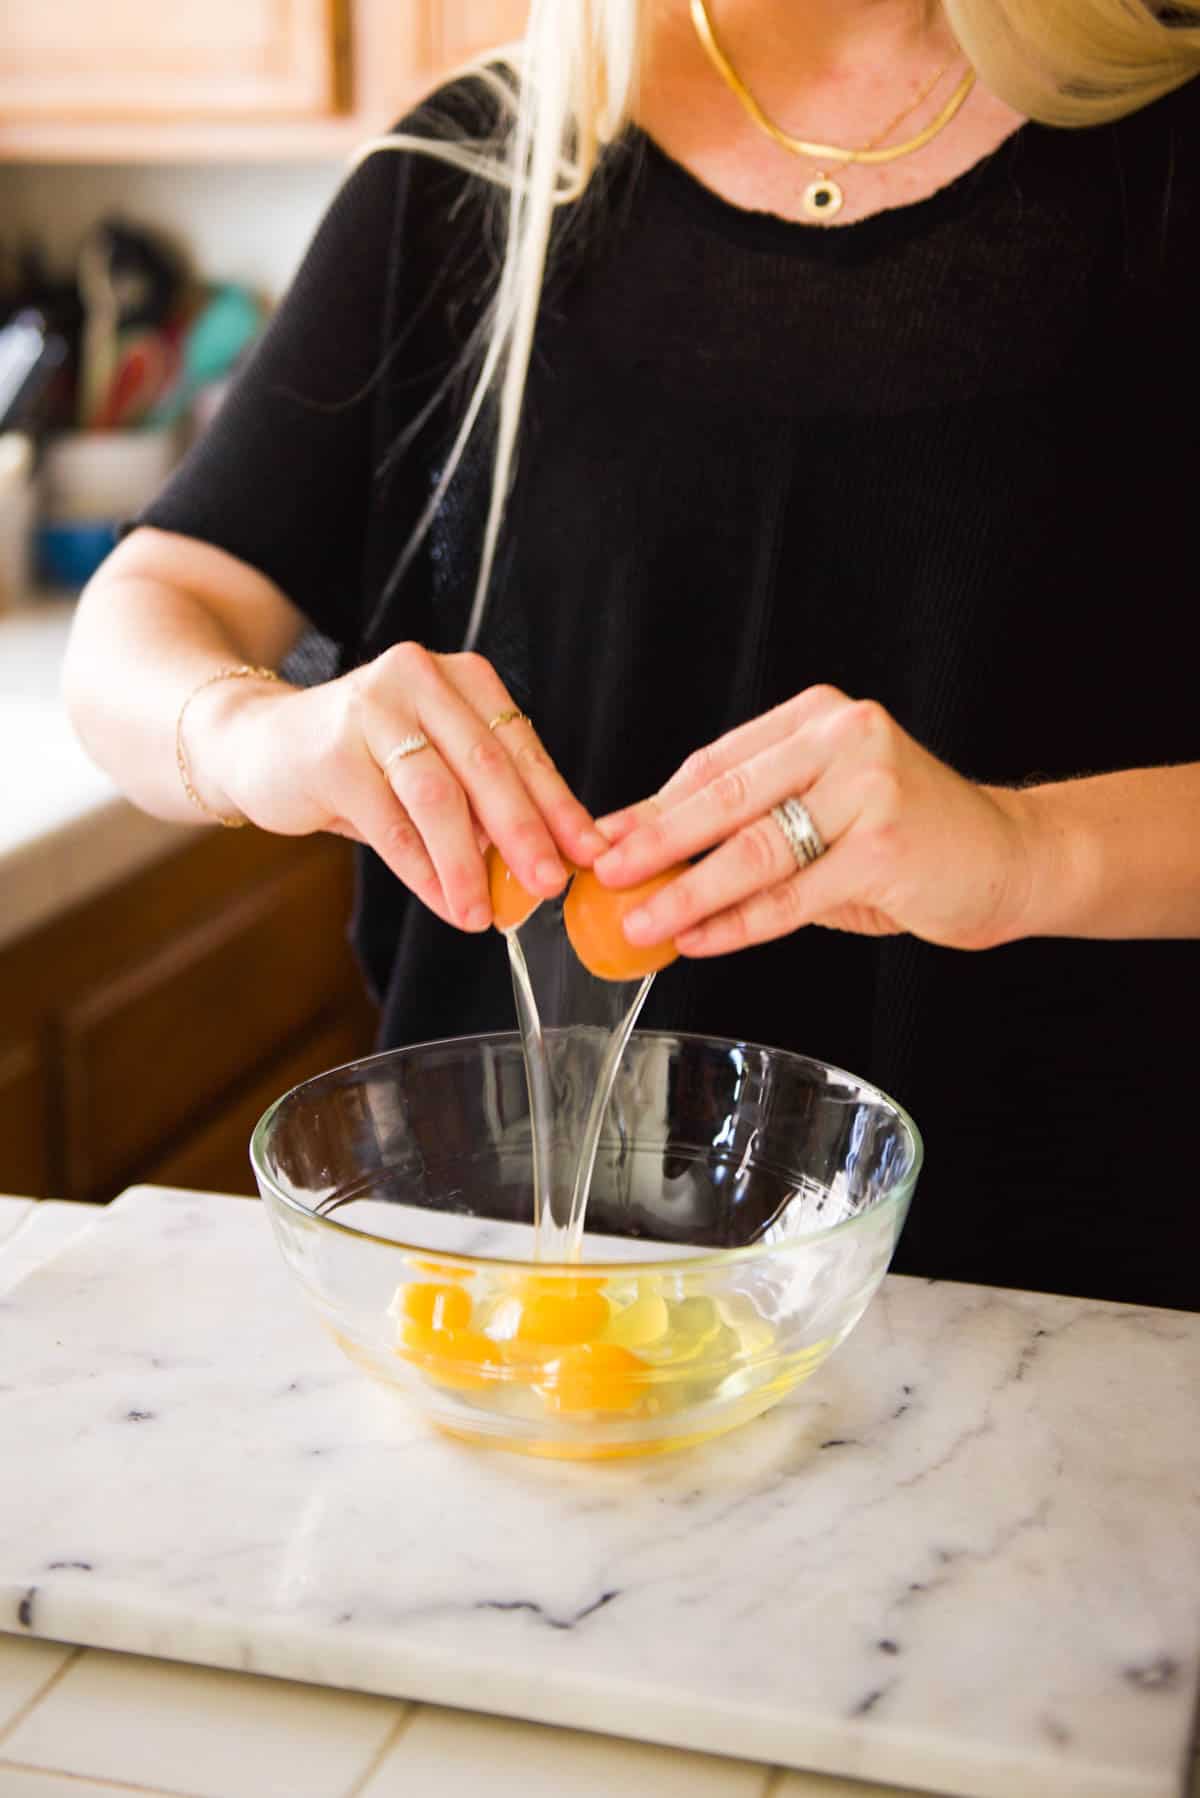 A woman cracking eggs into a large glass mixing bowl on the counter.